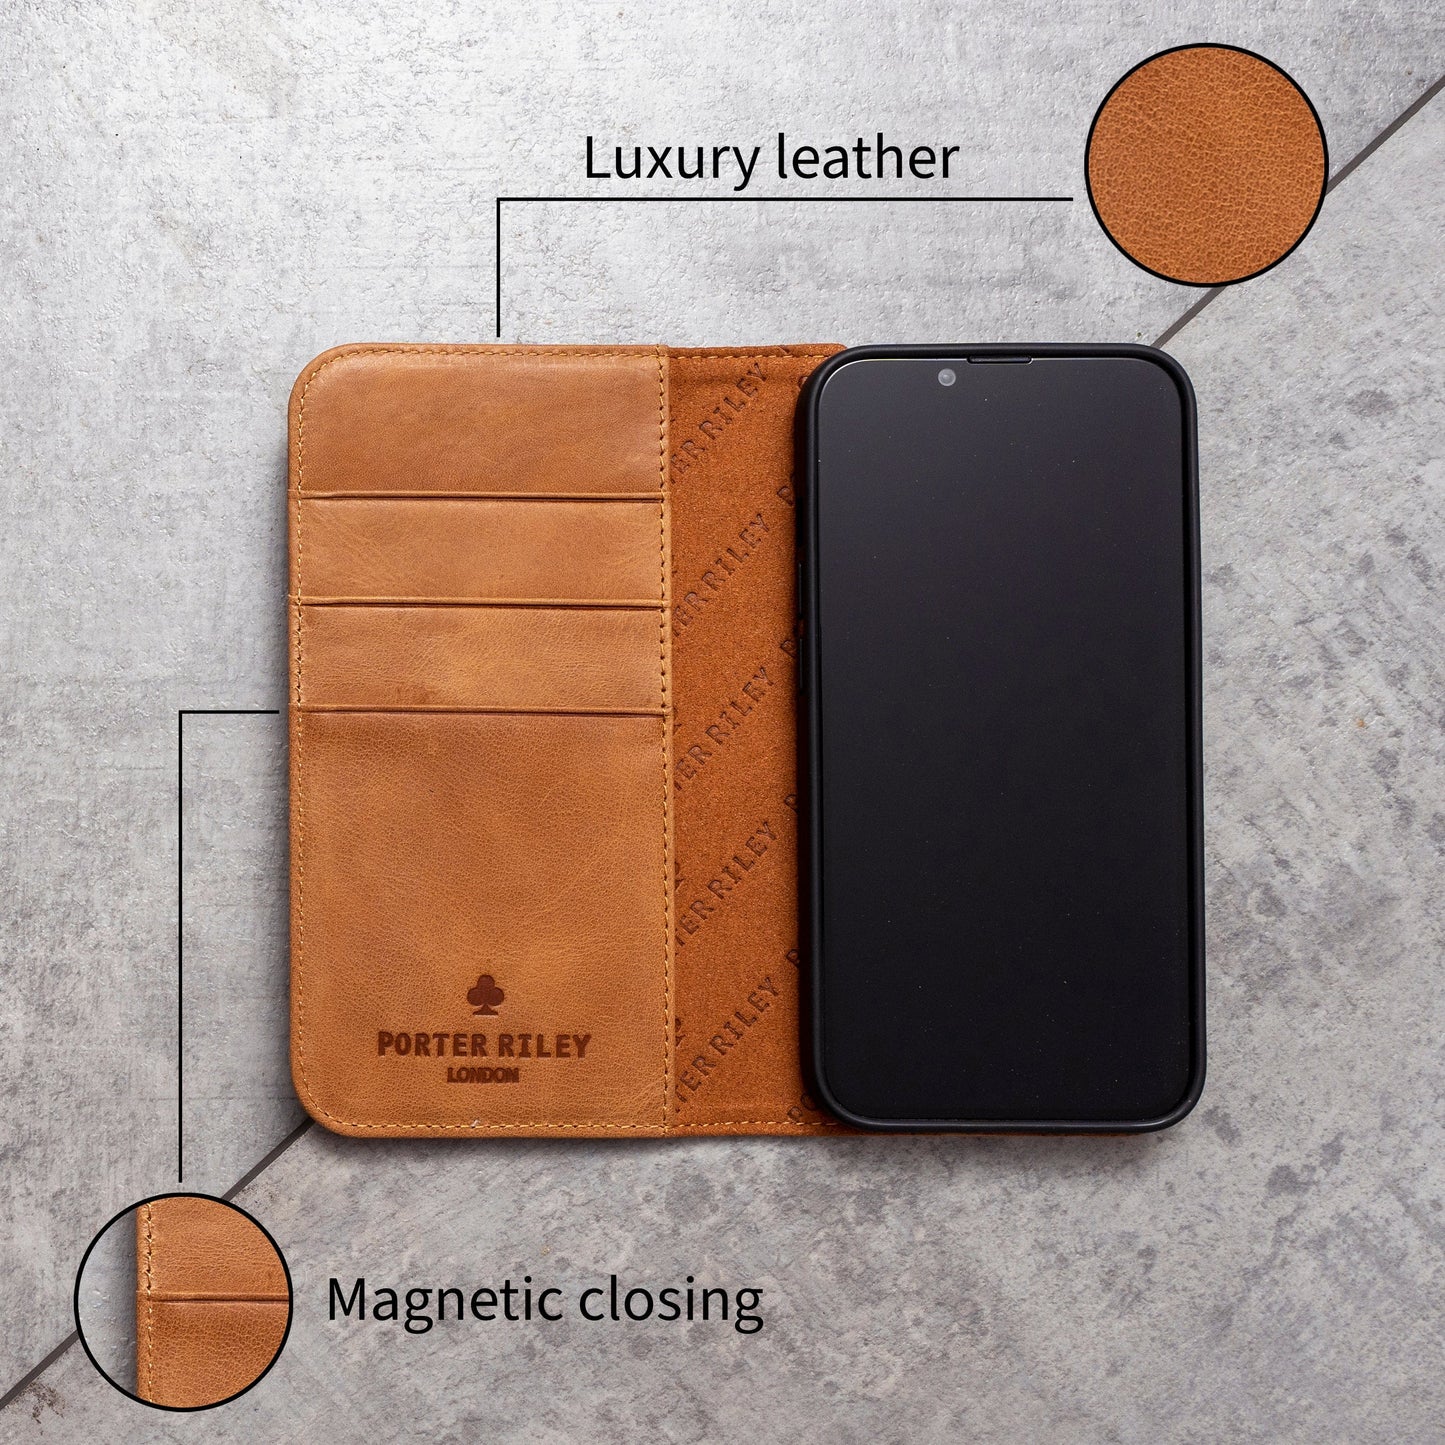 Huawei Mate 20 Pro Leather Case. Premium Slim Genuine Leather Stand Case/Cover/Wallet (Tan)